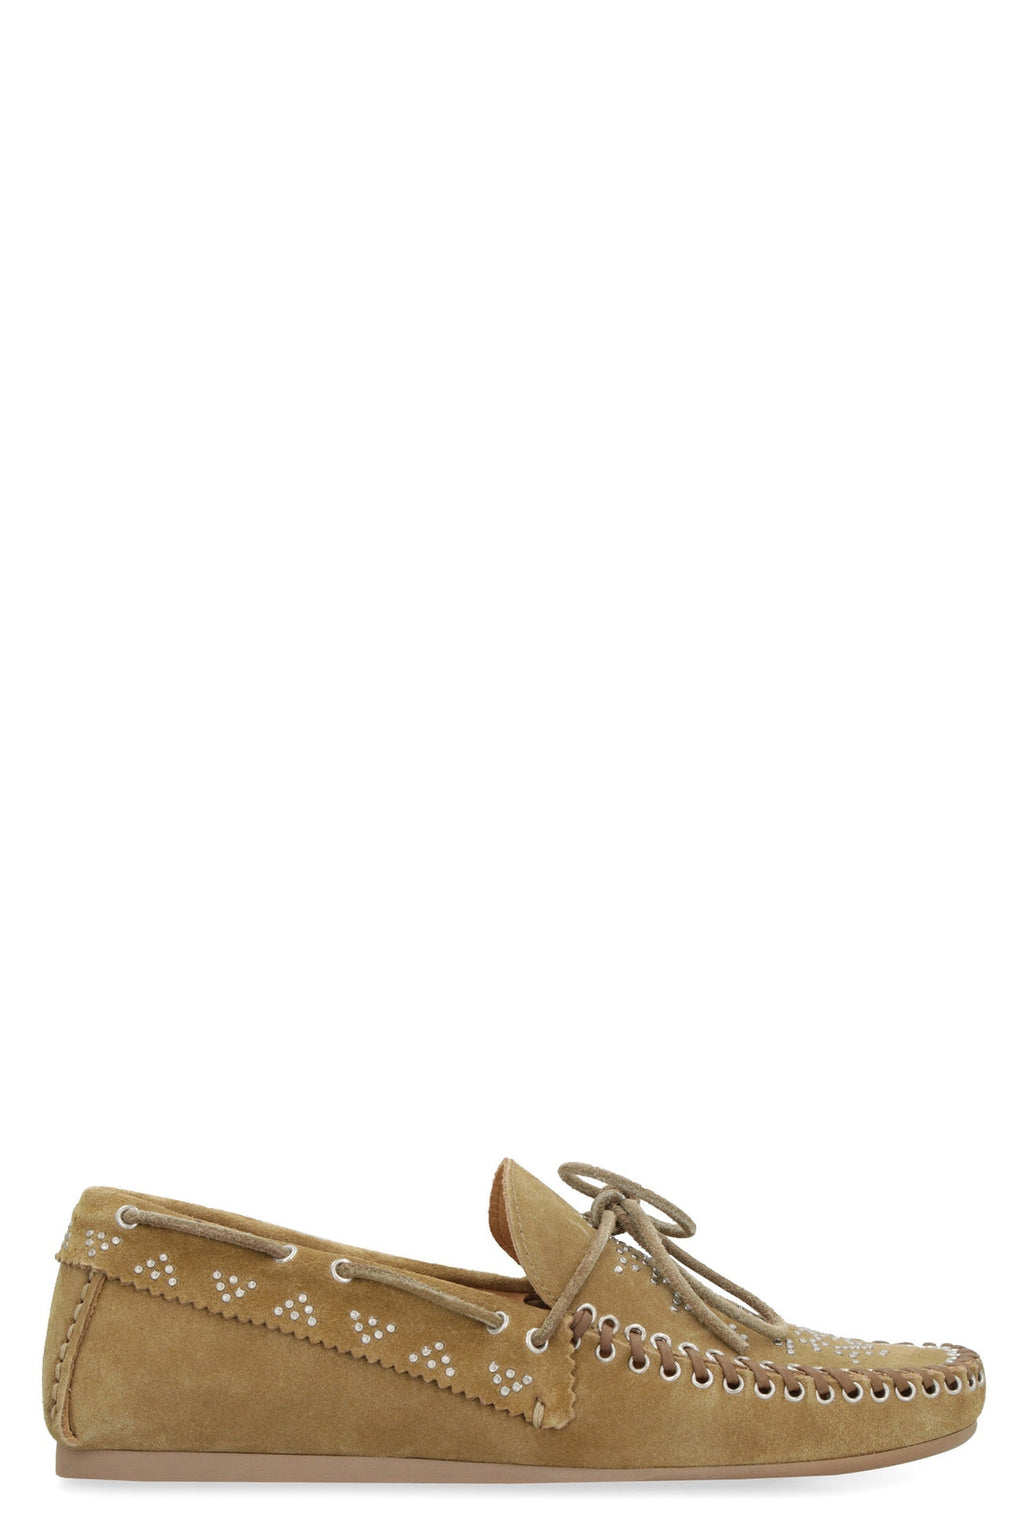 Isabel Marant-OUTLET-SALE-Freen studded suede loafers-ARCHIVIST